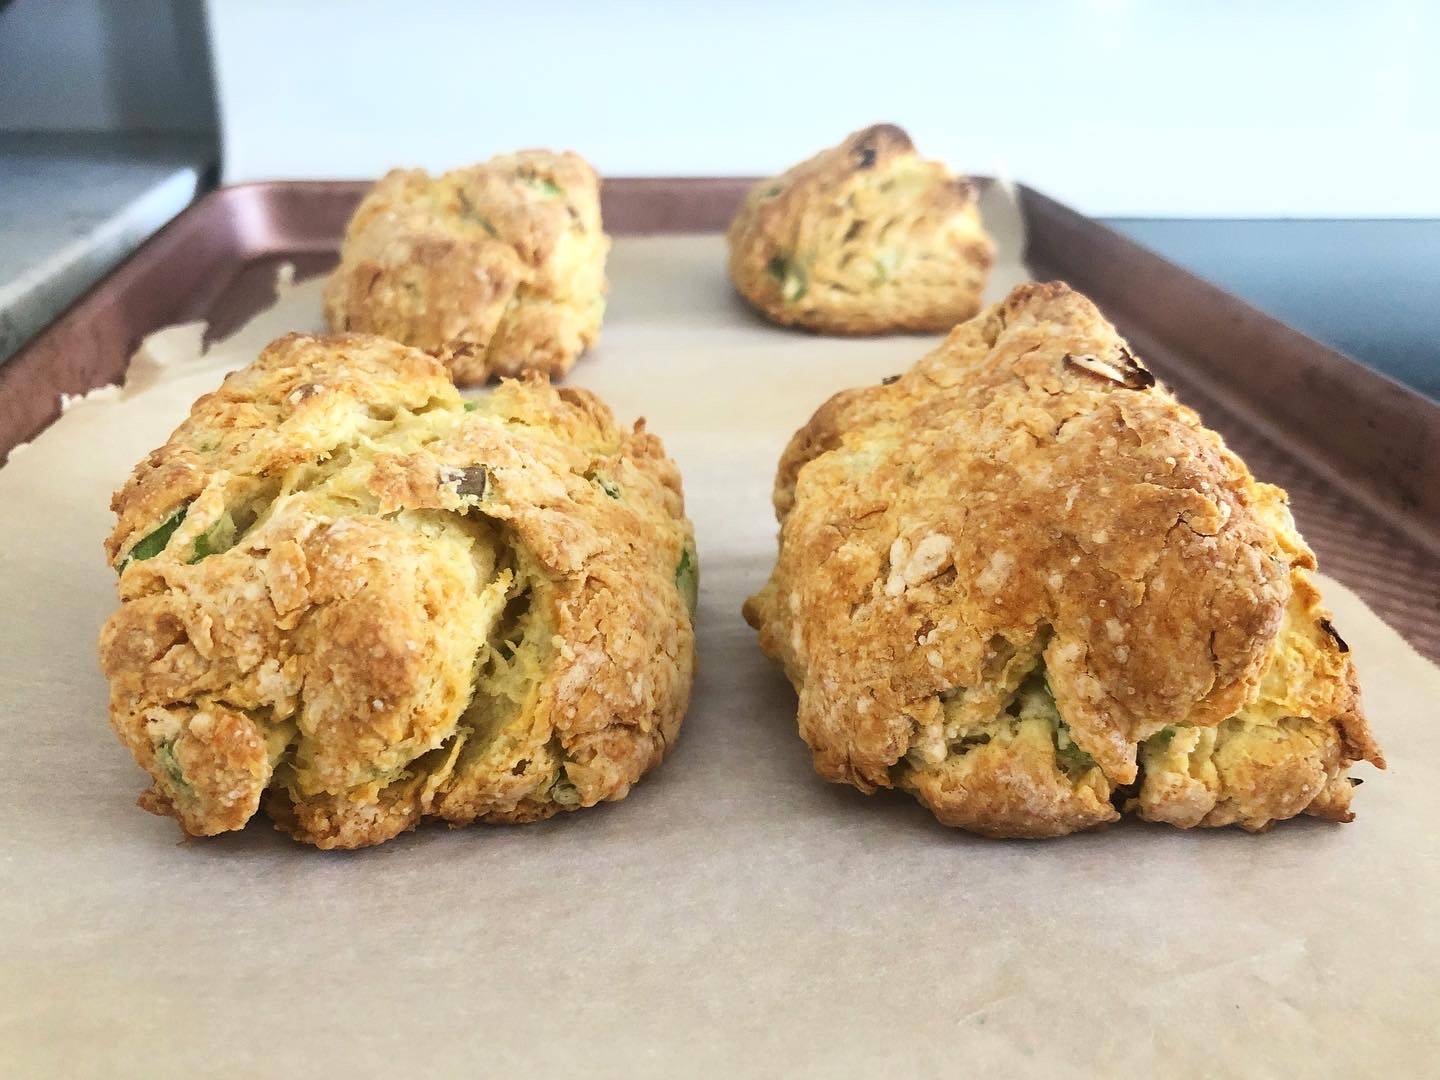 Four sour cream and onion biscuits sit on a parchment paper on a rose gold baking sheet. Photo by Alyssa Buckley.